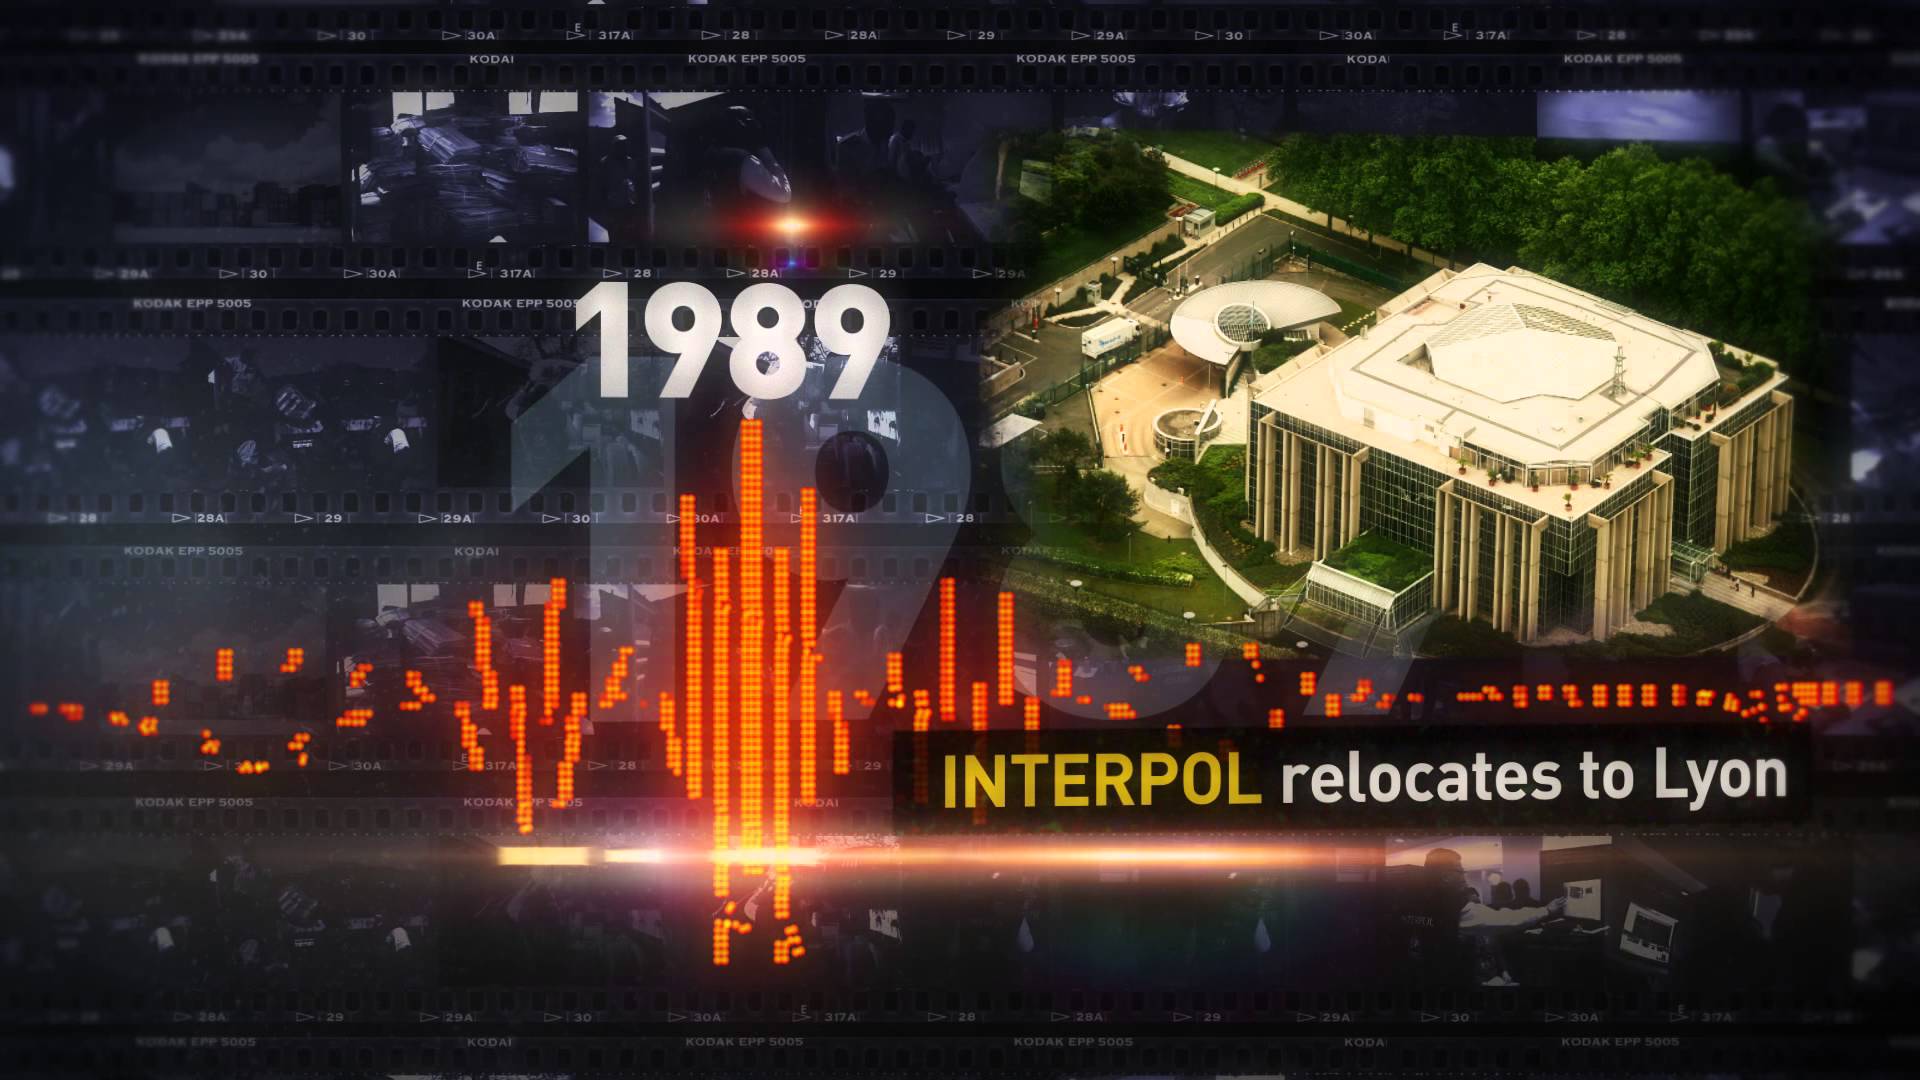 INTERPOL 100 Years of International Police Cooperation